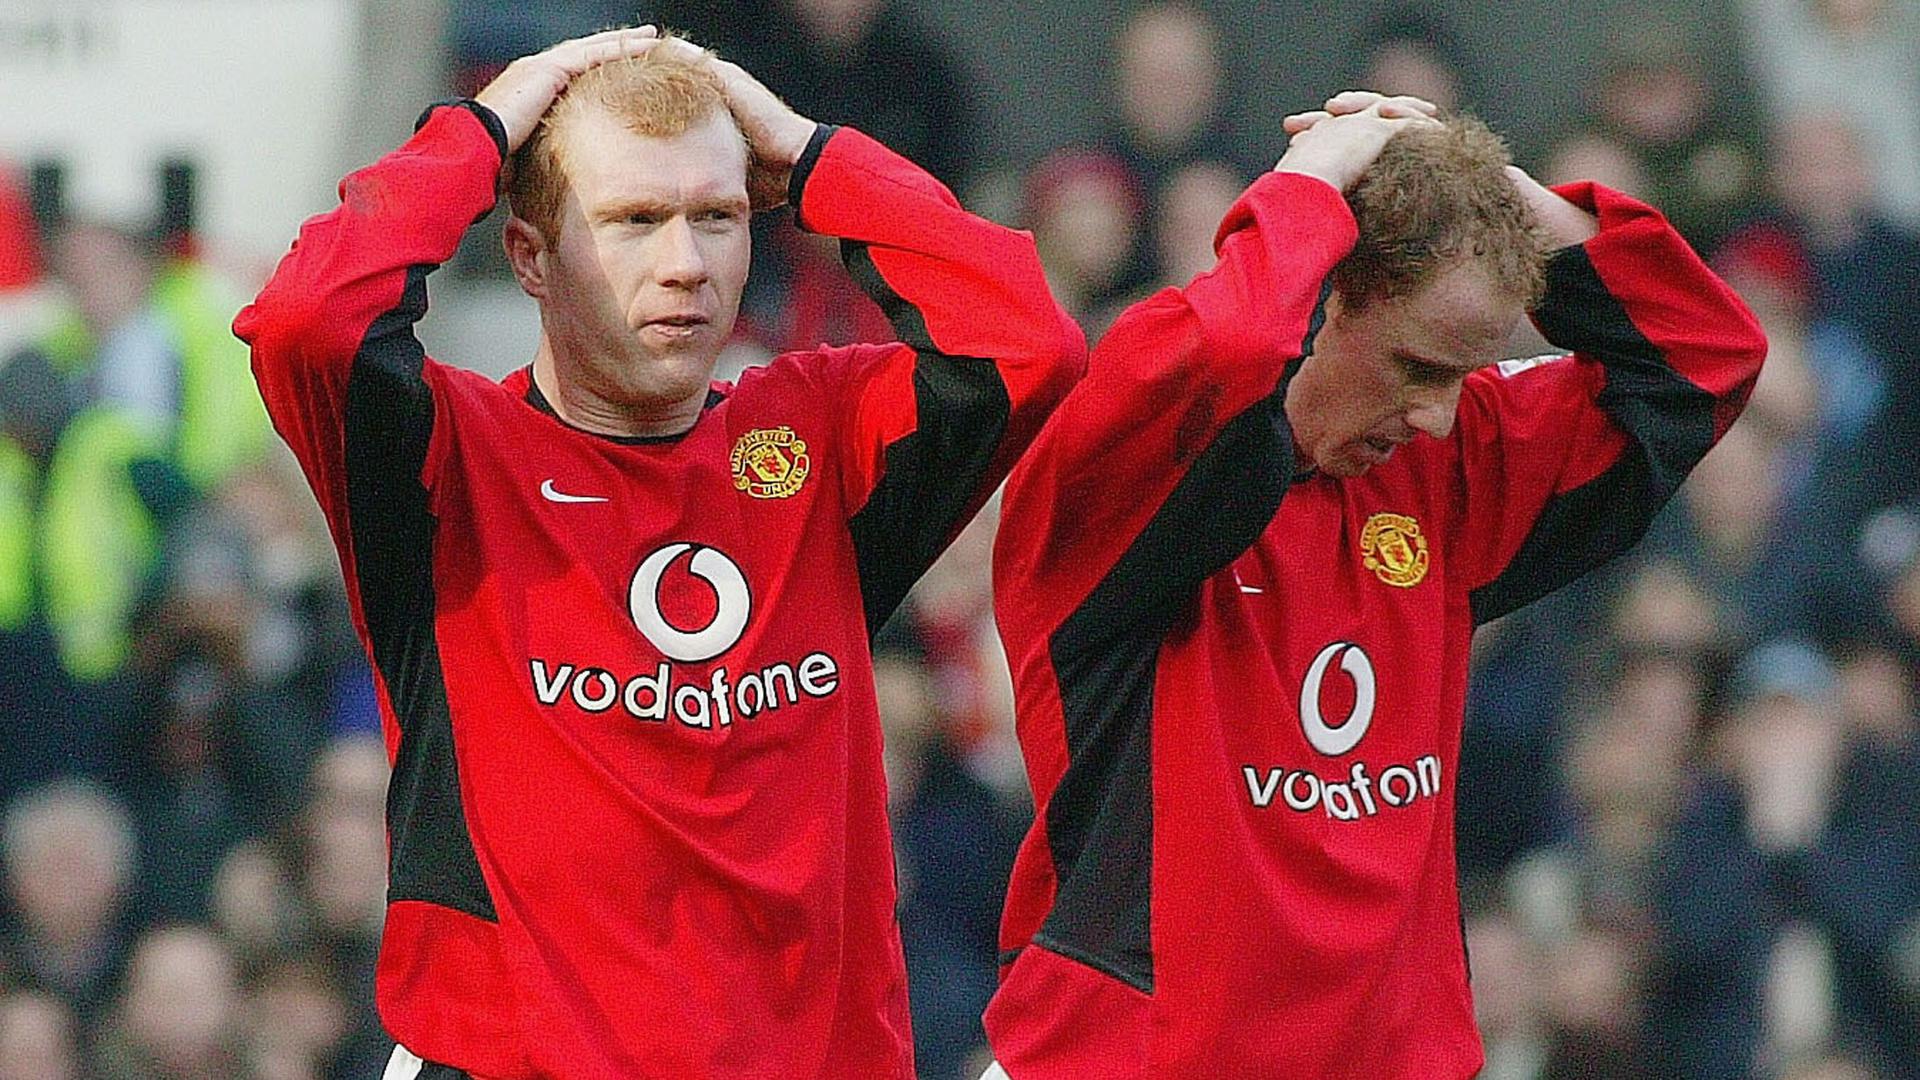 My Perfect Player feature with Man Utd legend Paul Scholes